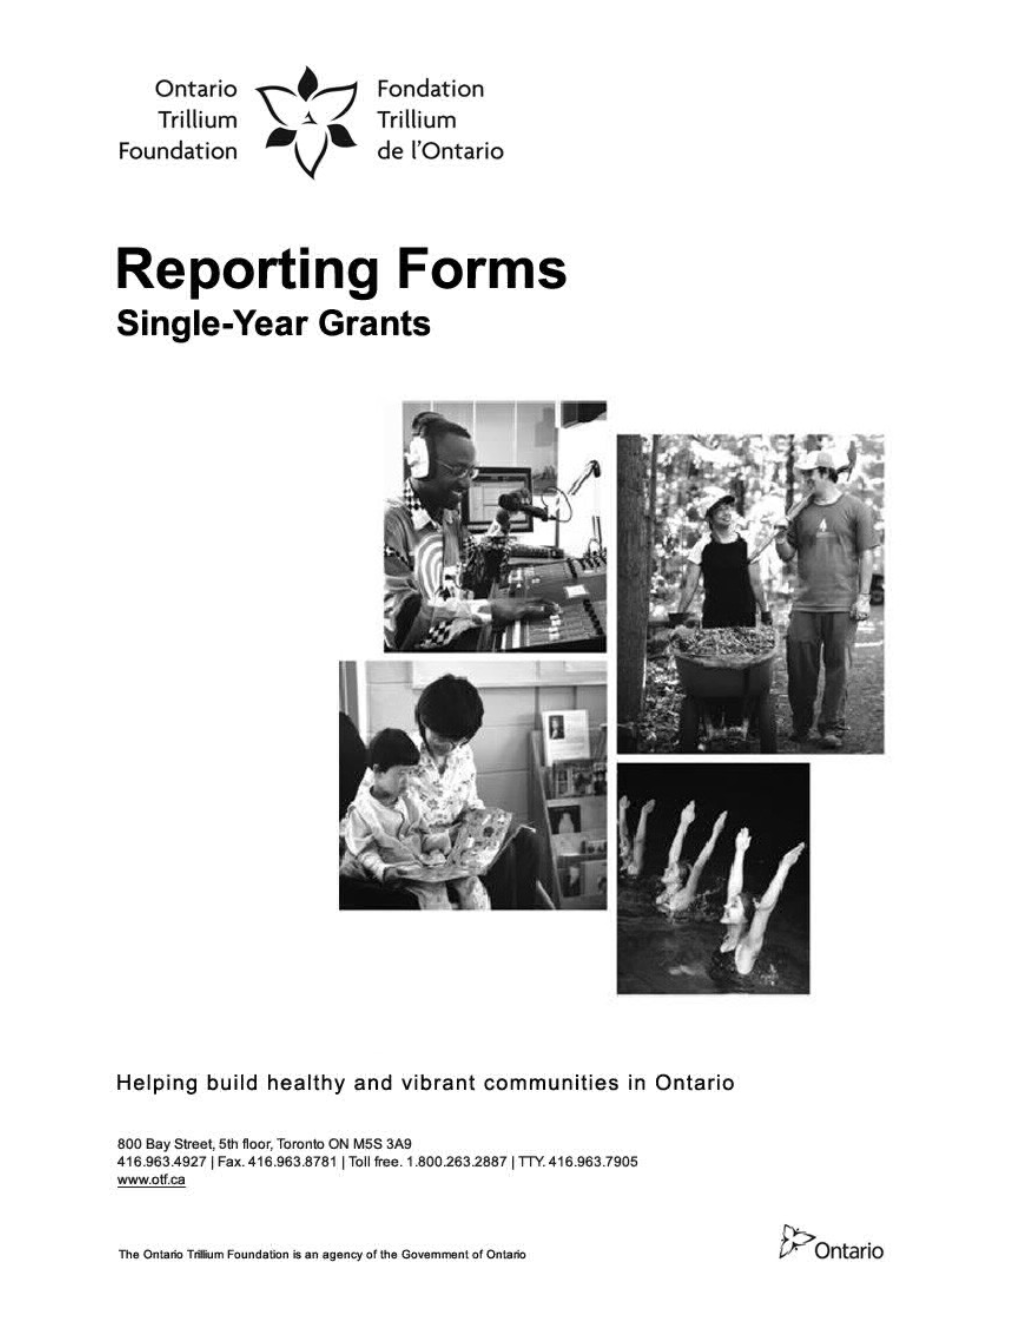 Reporting Forms for Single-Year Grants